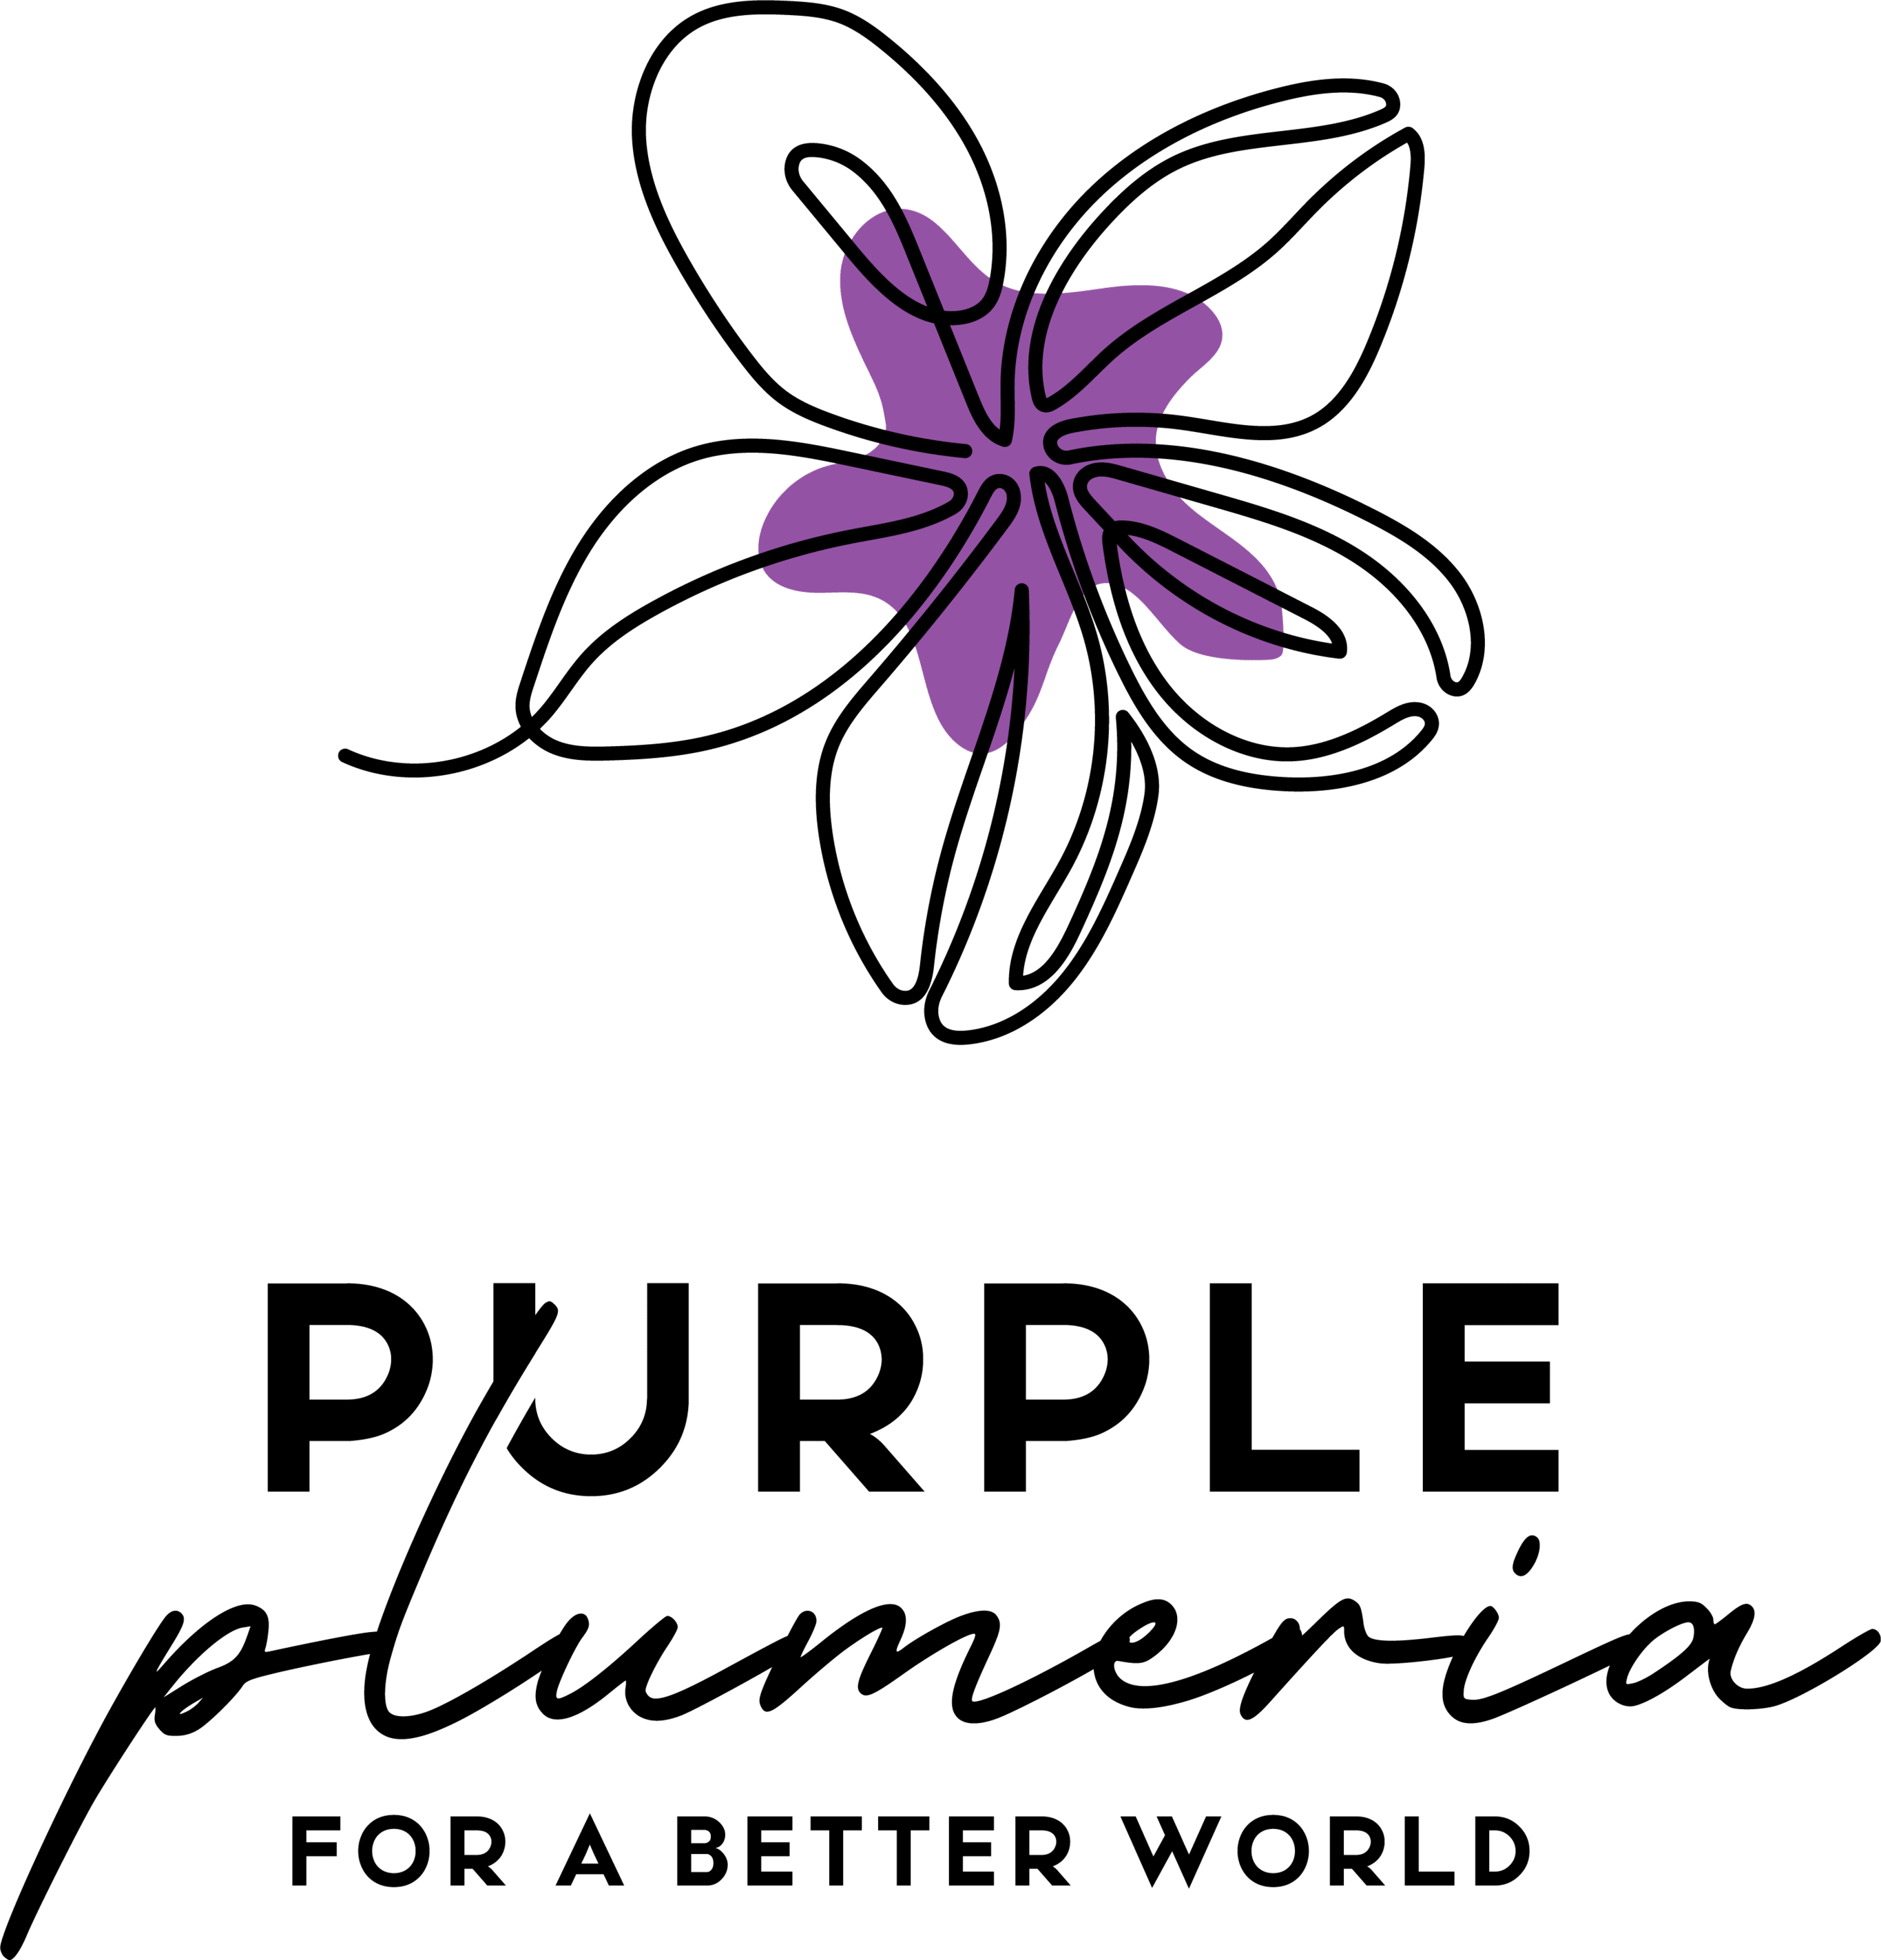 PurplePlumeria Introduces Eco-Friendly Home Goods Promoting Sustainable Living